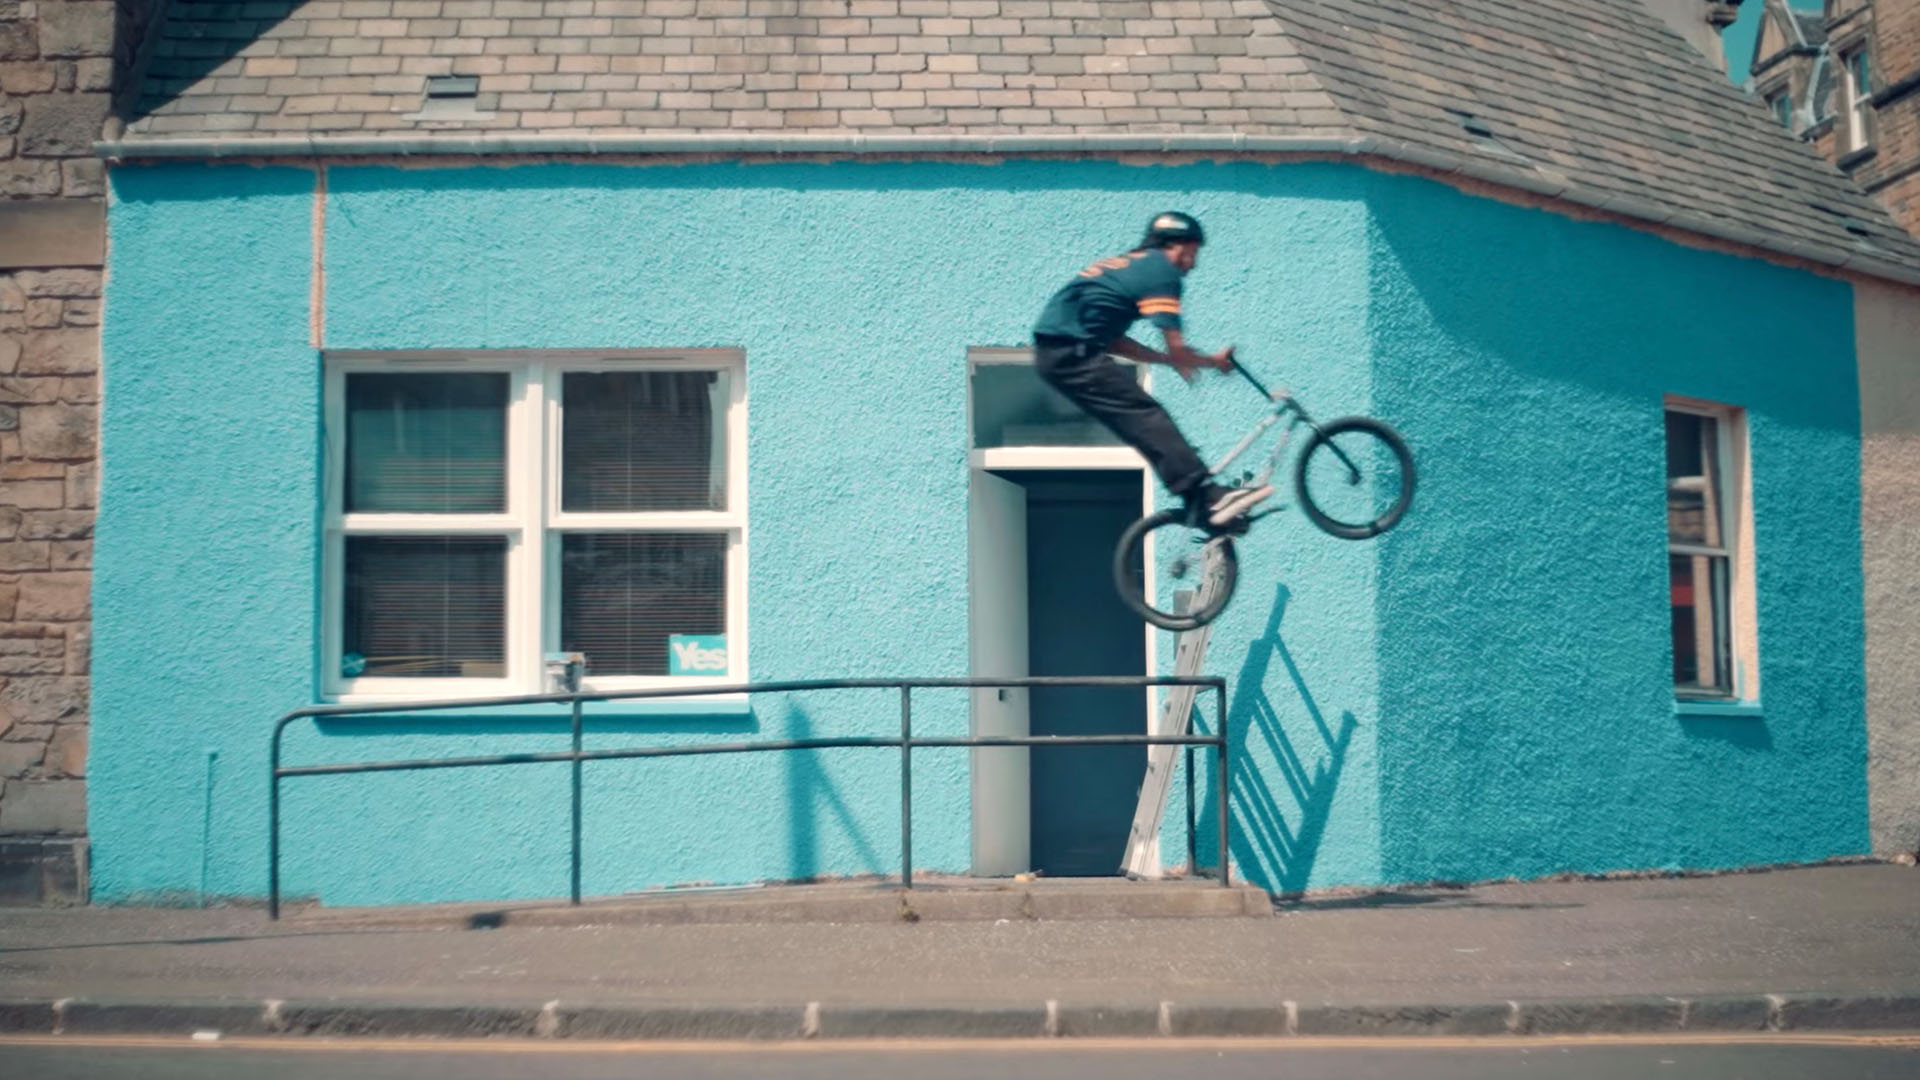 GT BMX: Michael Dickson – Welcome to the team